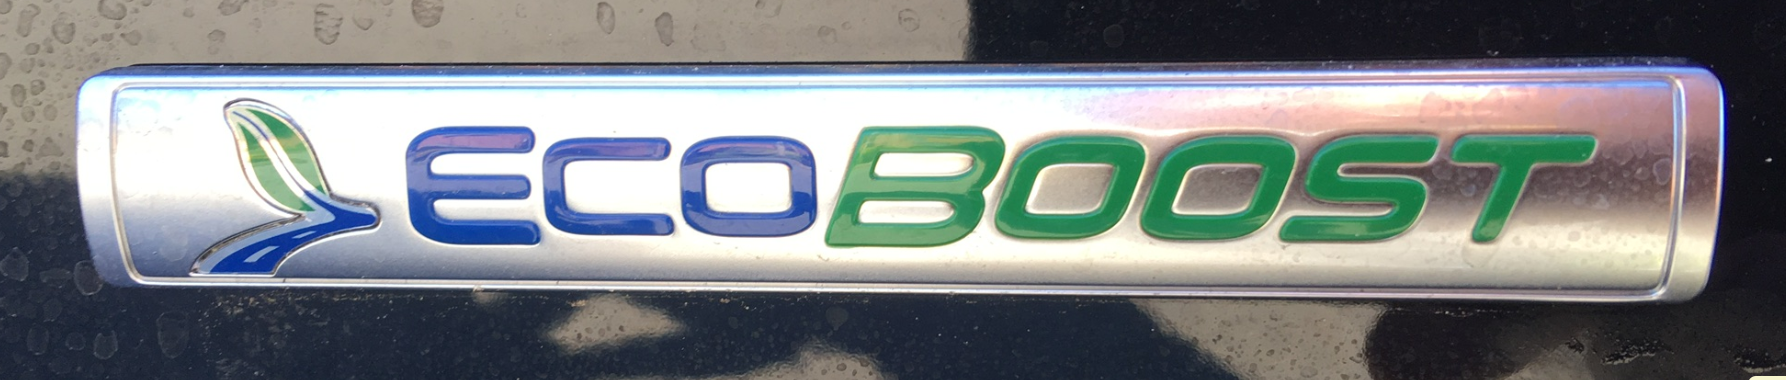 2018 EcoBoost Badge Removal on Tailgate - Ford F150 Forum - Community of  Ford Truck Fans